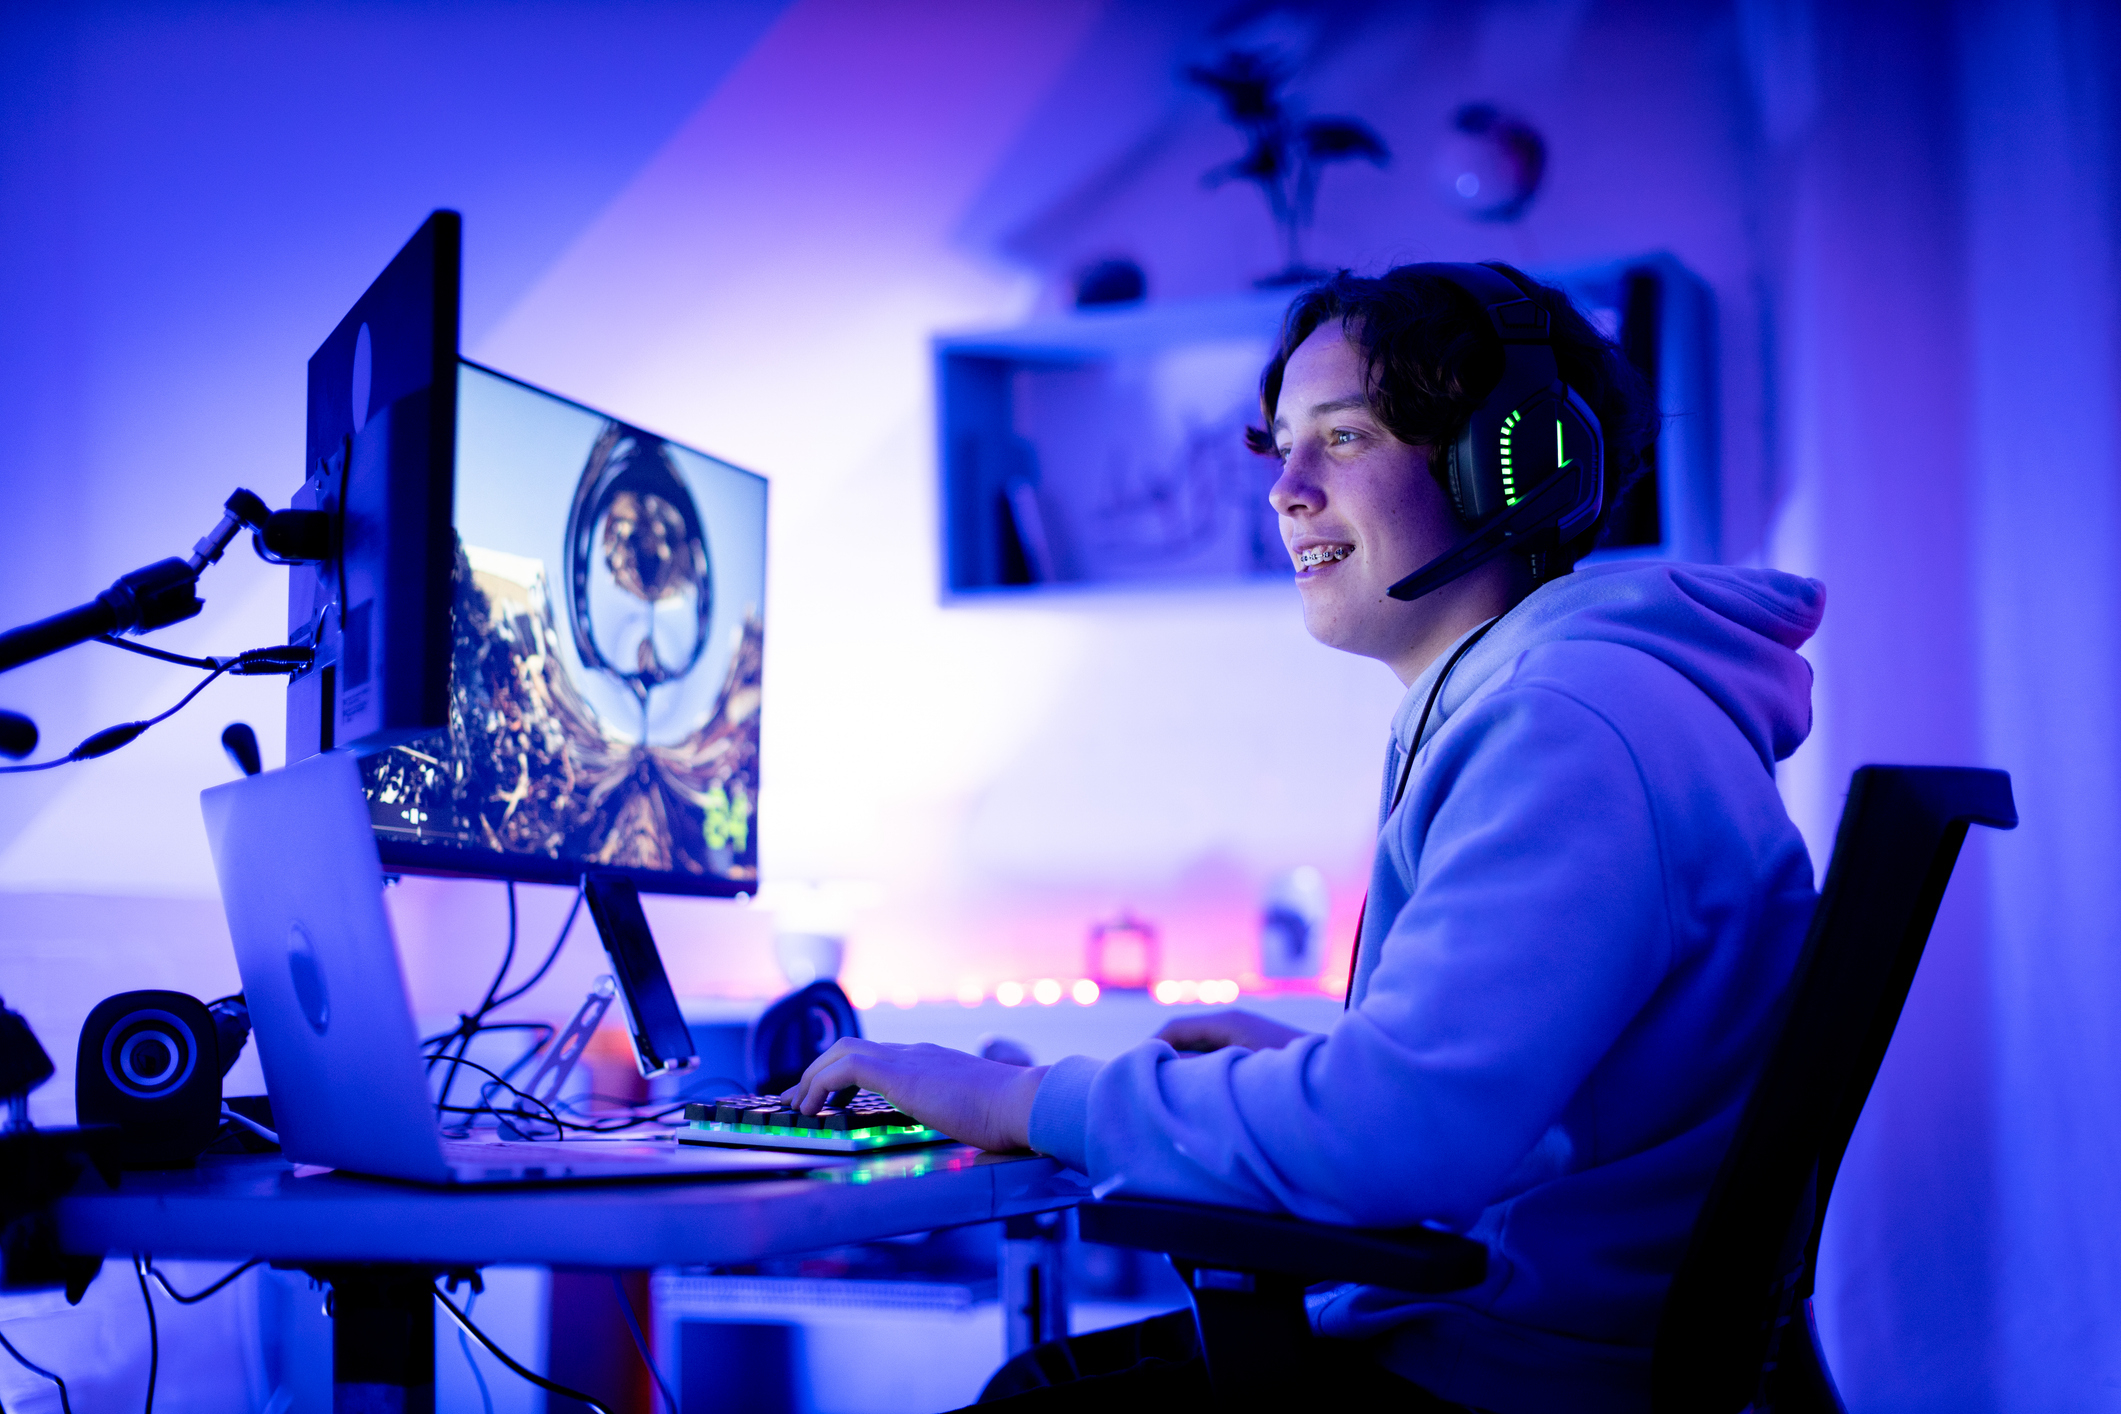 A person wearing a hoodie and a gaming headset sits at a desk with multiple monitors, actively engaging in a video game. The room background includes shelves and tech equipment